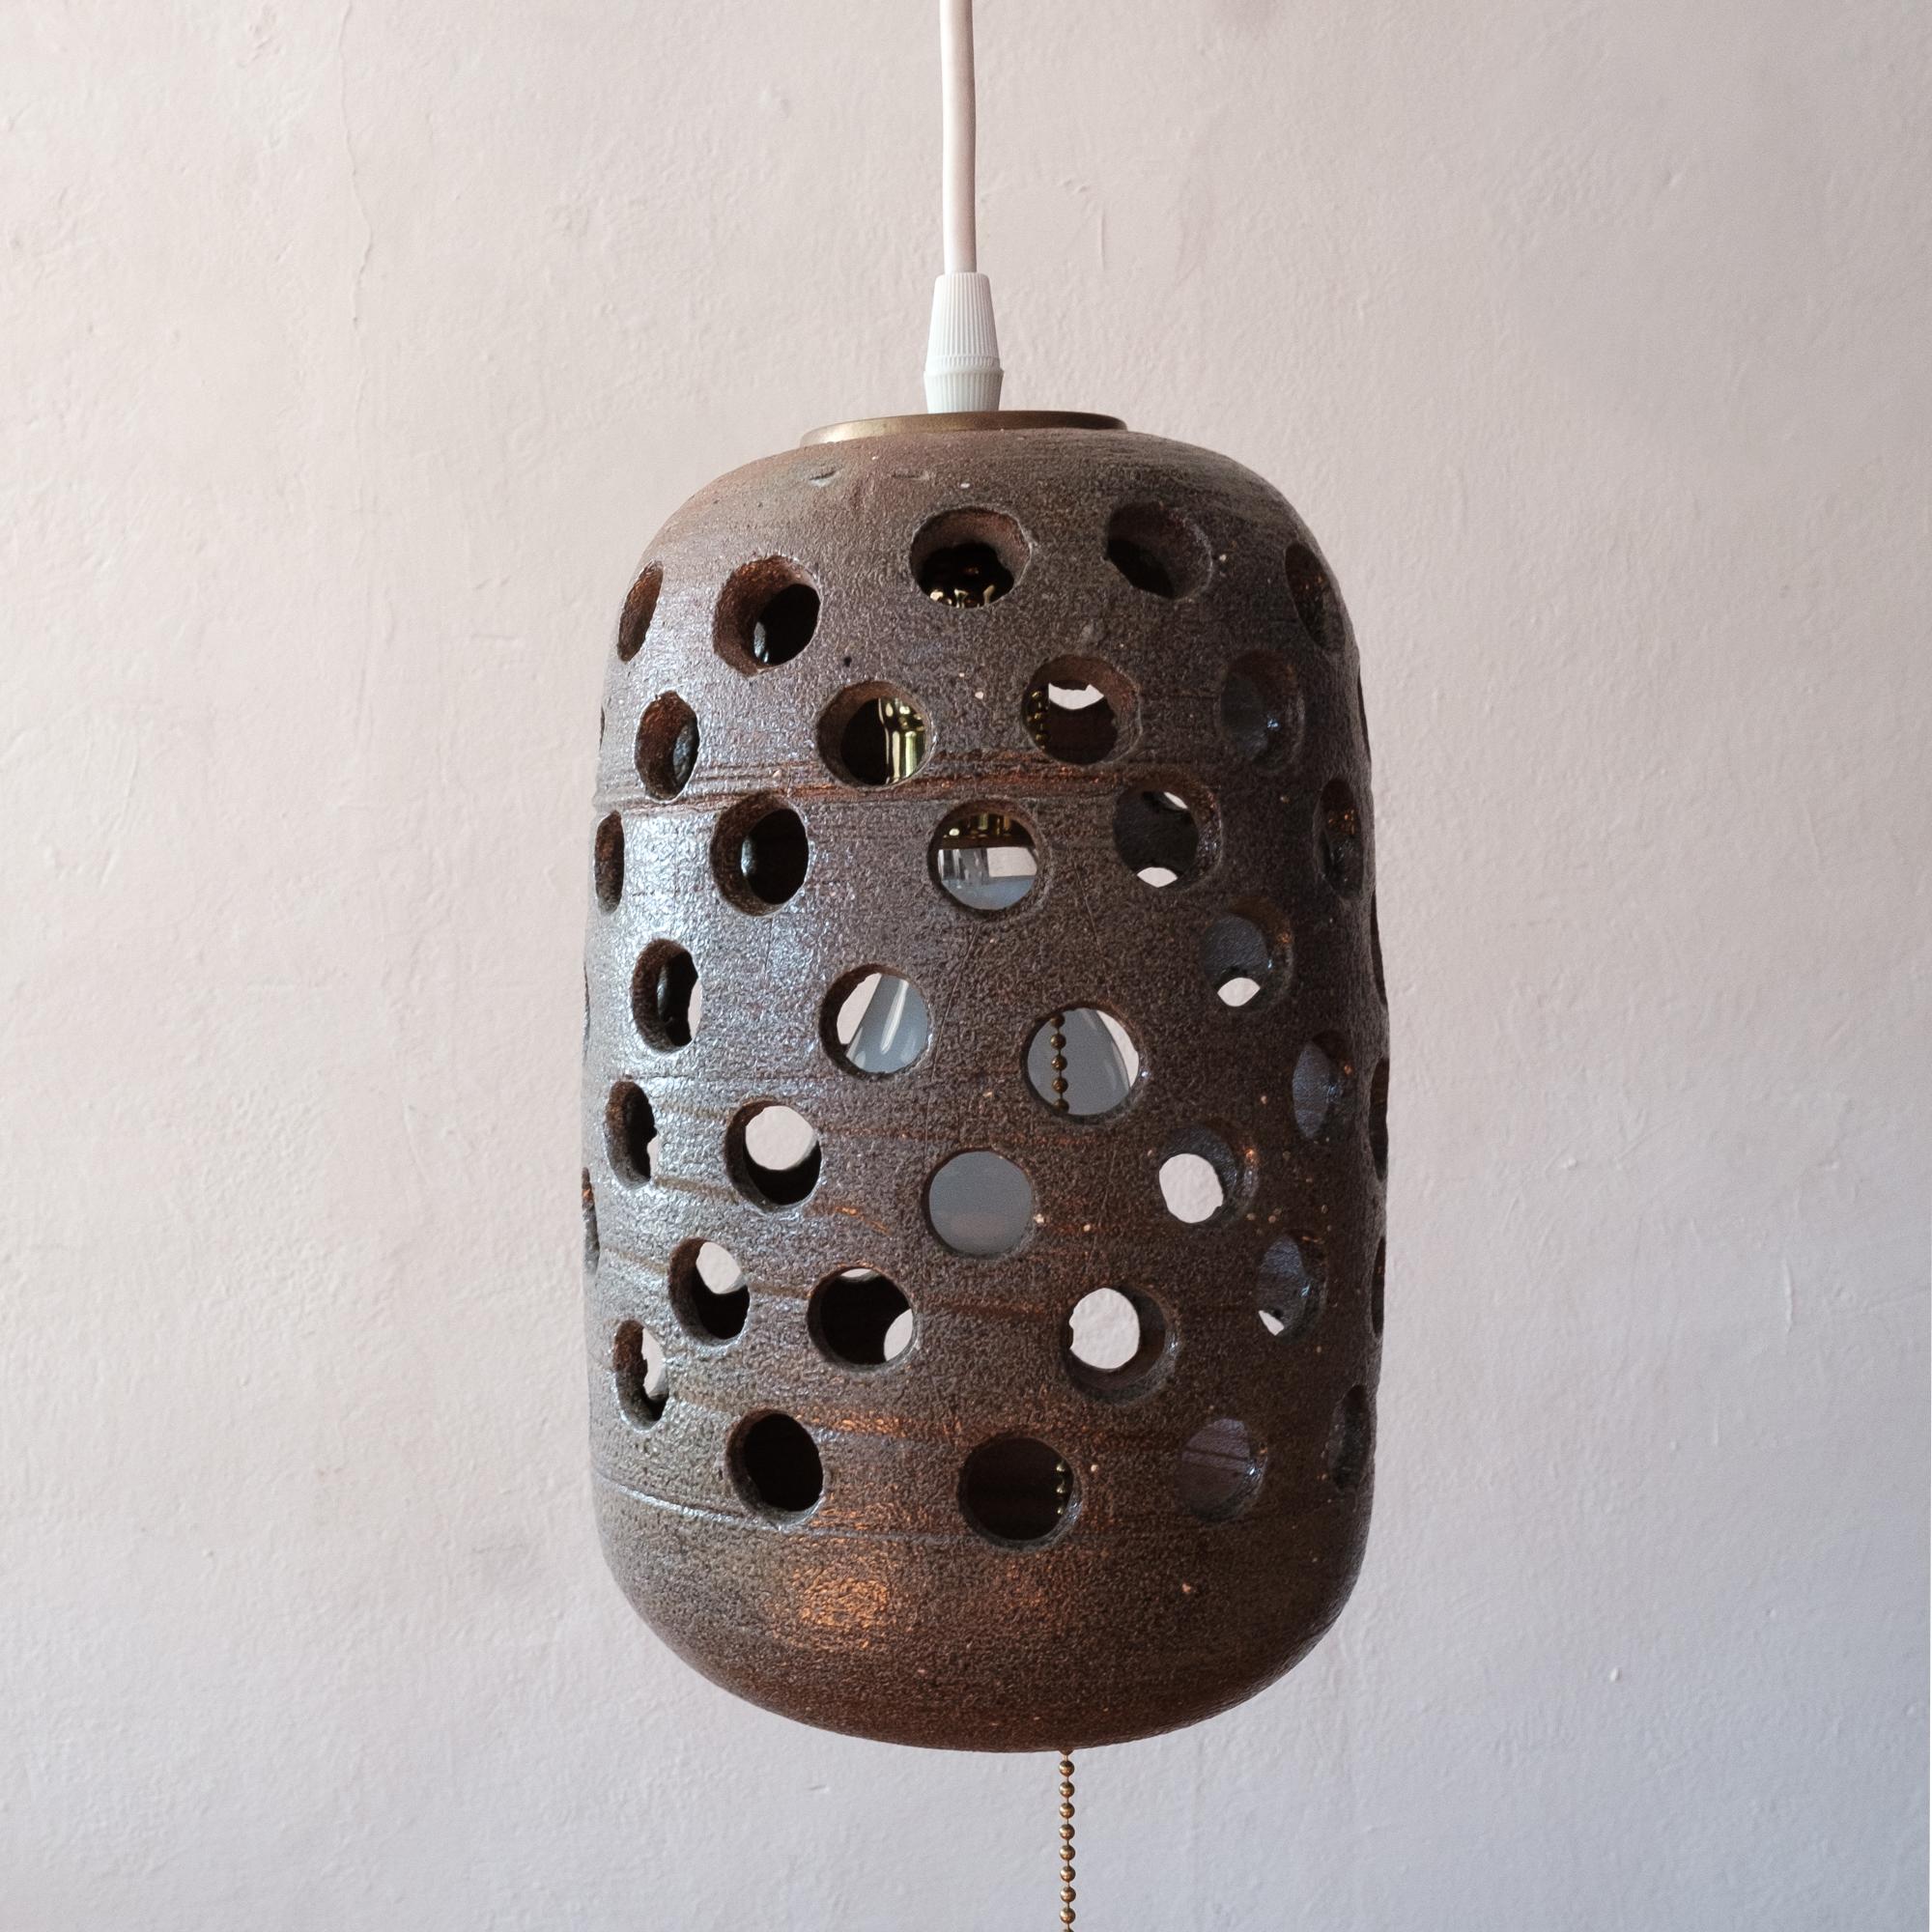 Hanging ceramic pendant lamp from the 1960s. This lamp hung at the estate of ceramic artist and Mingei Museum founder, Martha Longenecker. The estate included work by Longenecker and many ceramics by Japanese ceramicists. This piece is unsigned.